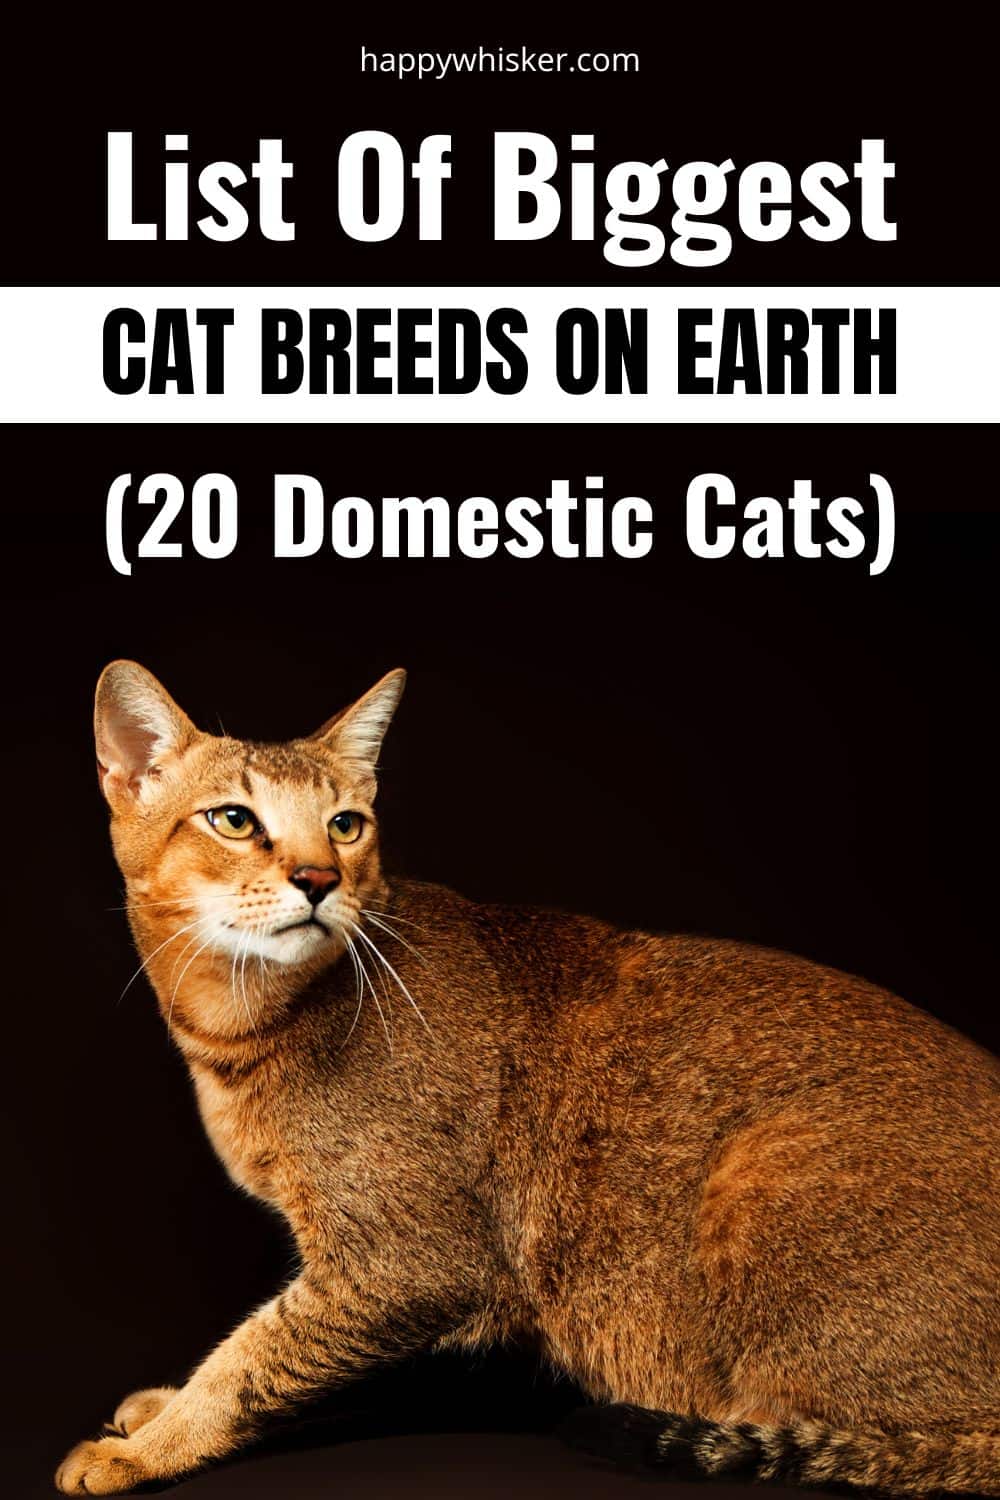 List Of Biggest Cat Breeds On Earth (20 Domestic Cats) Pinterest 